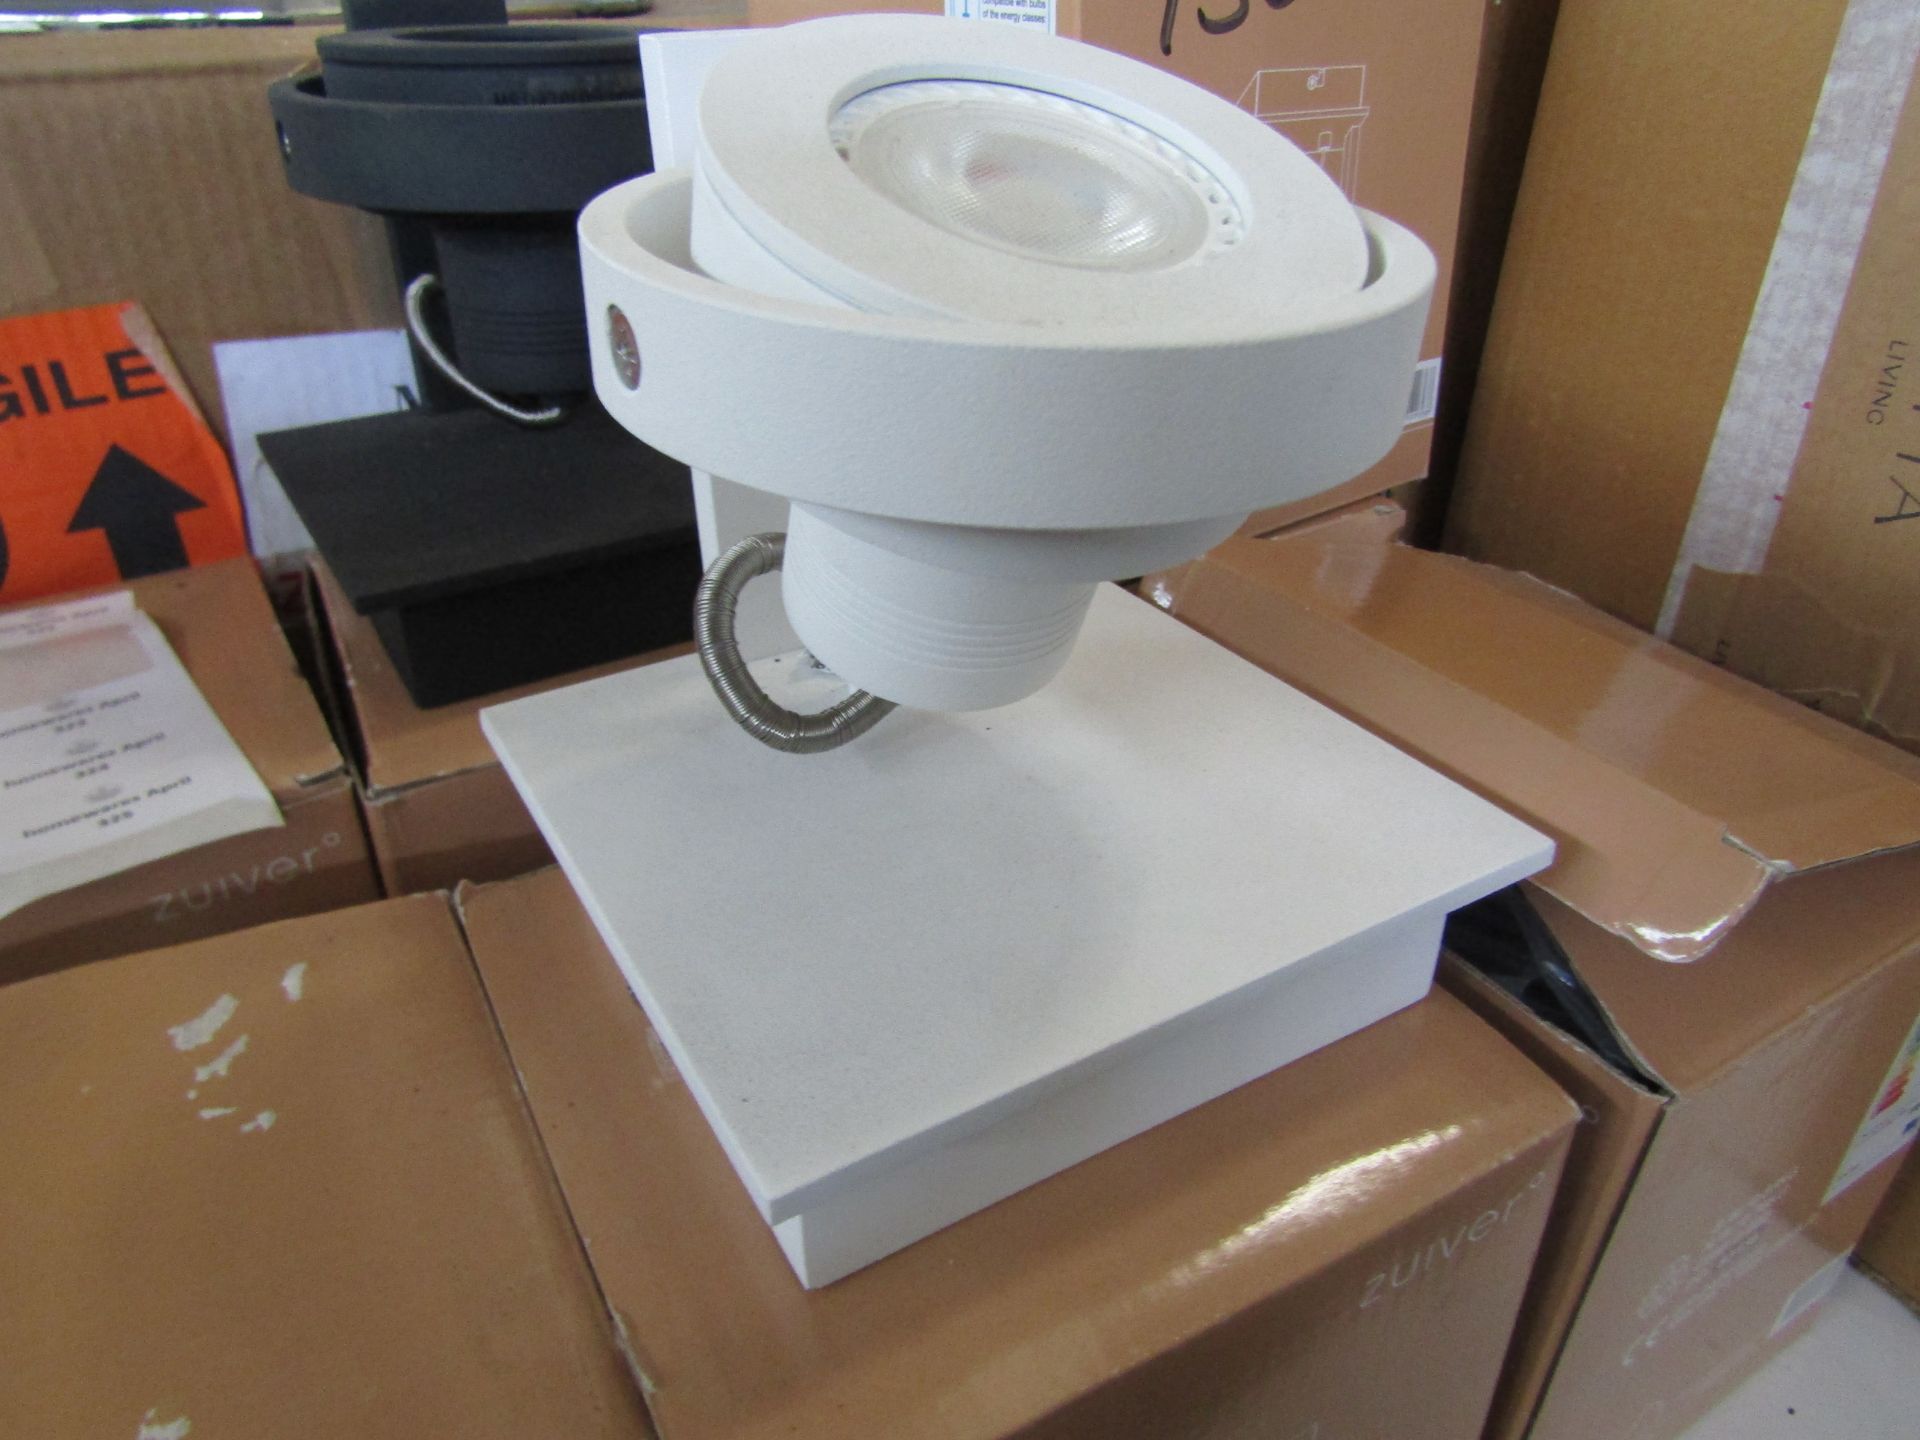 Dimmable Single Spotlight White. Size: W11.5 x D11.5 x H12.8cm - RRP ?70.00 - New & Boxed. (450)